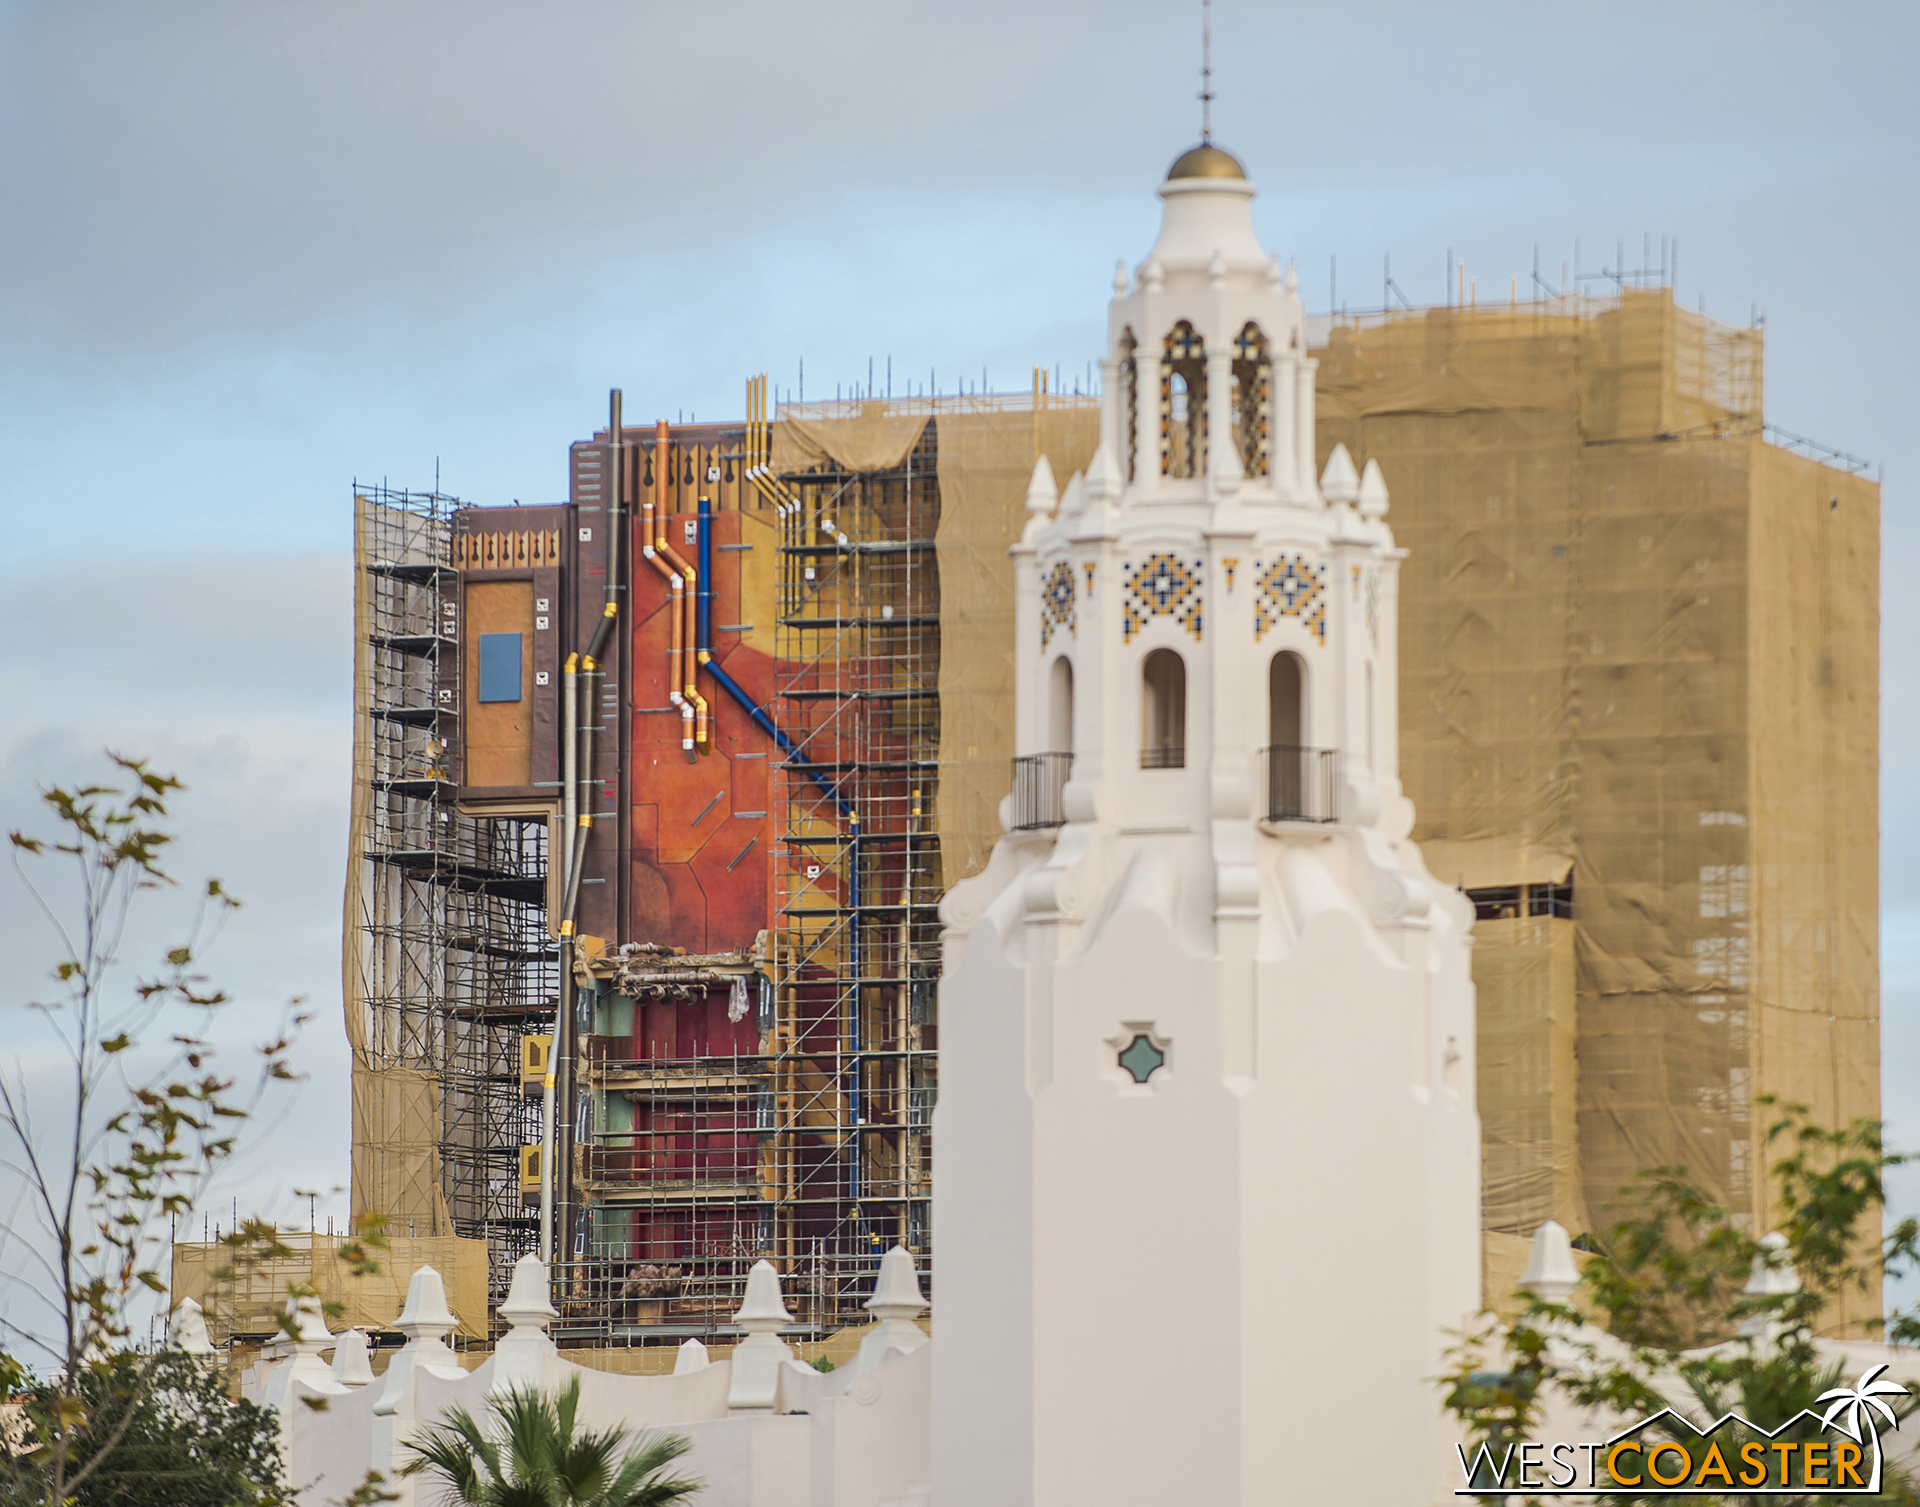  Carthay Circle Restaurant's like, "It's behind me, isn't it?" 